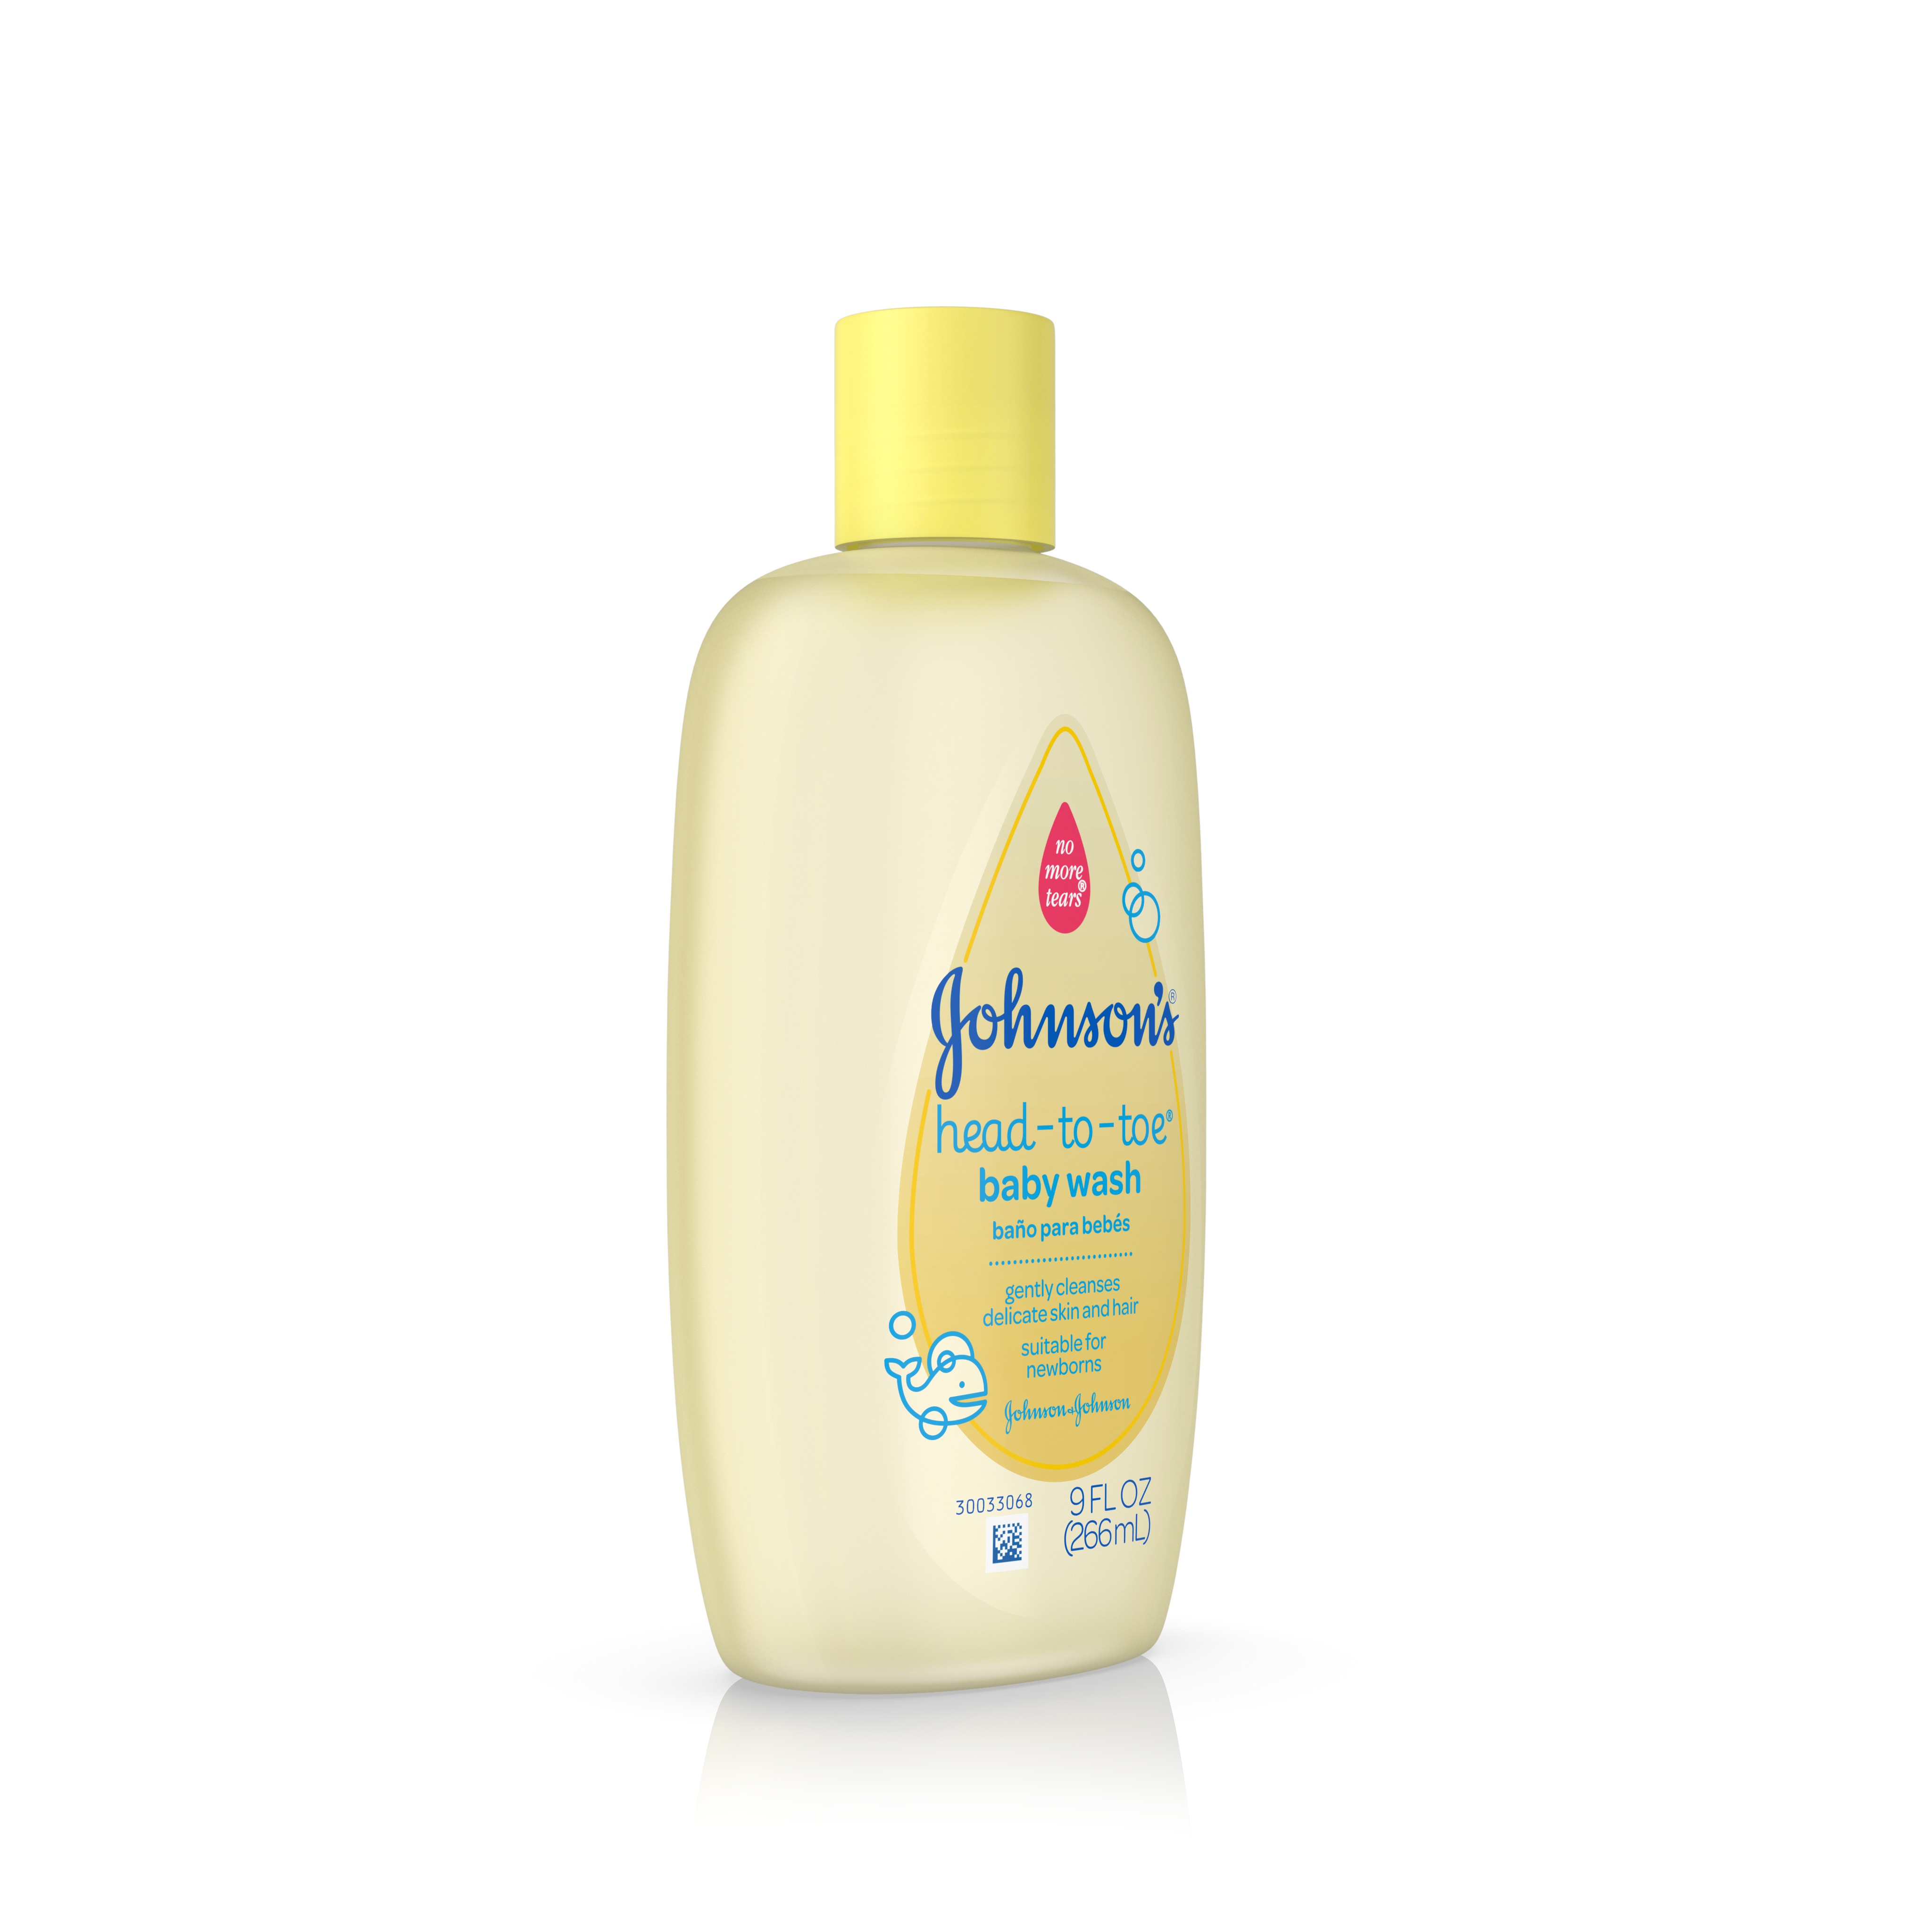 Johnson's Head-To-Toe Baby Wash For Gentle Cleansing, 9 Fl. Oz. - image 2 of 6